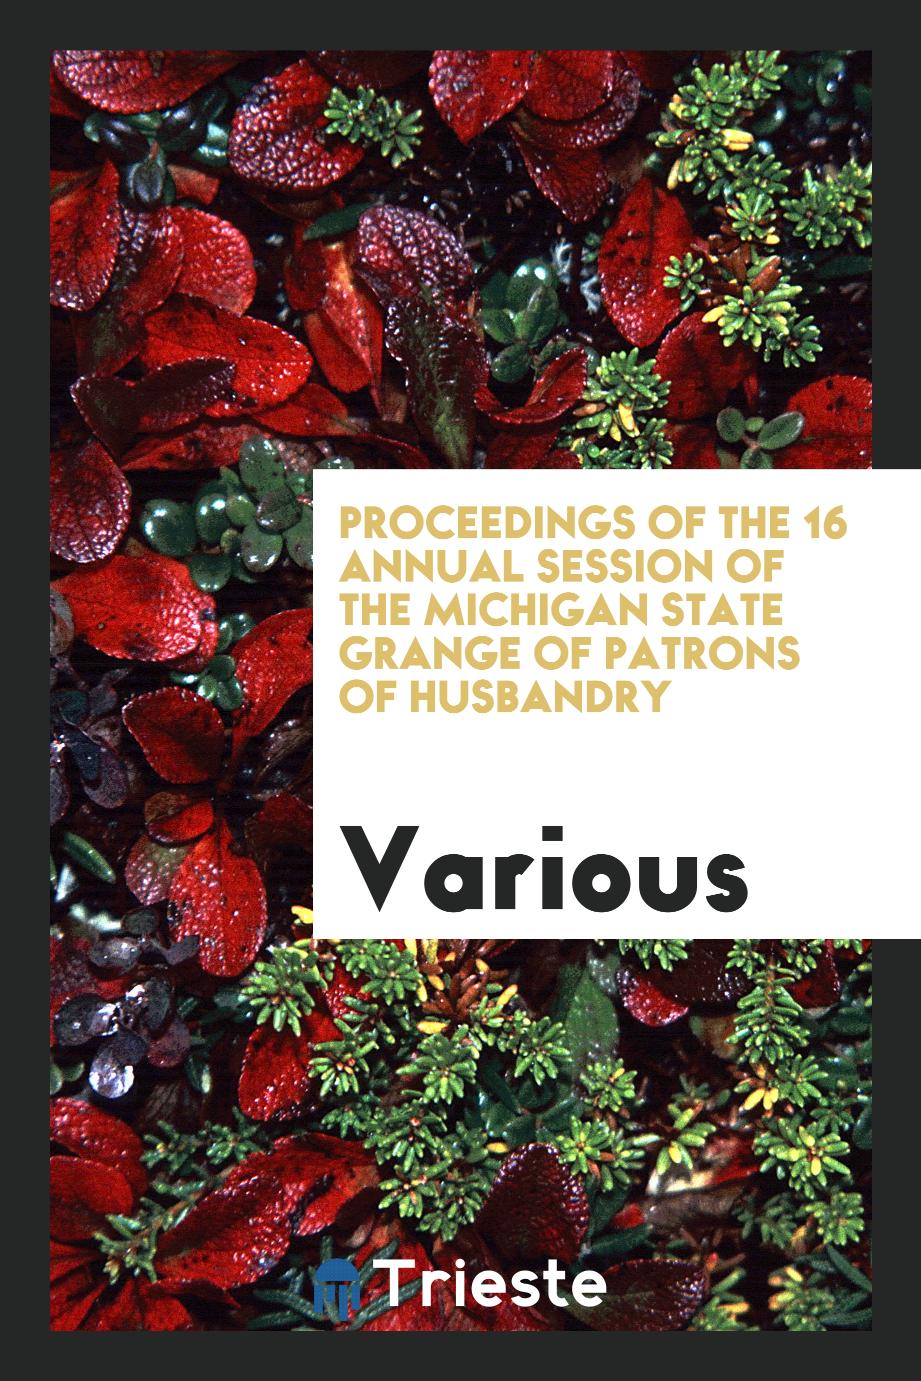 Proceedings of the 16 Annual Session of the Michigan State Grange of Patrons of Husbandry